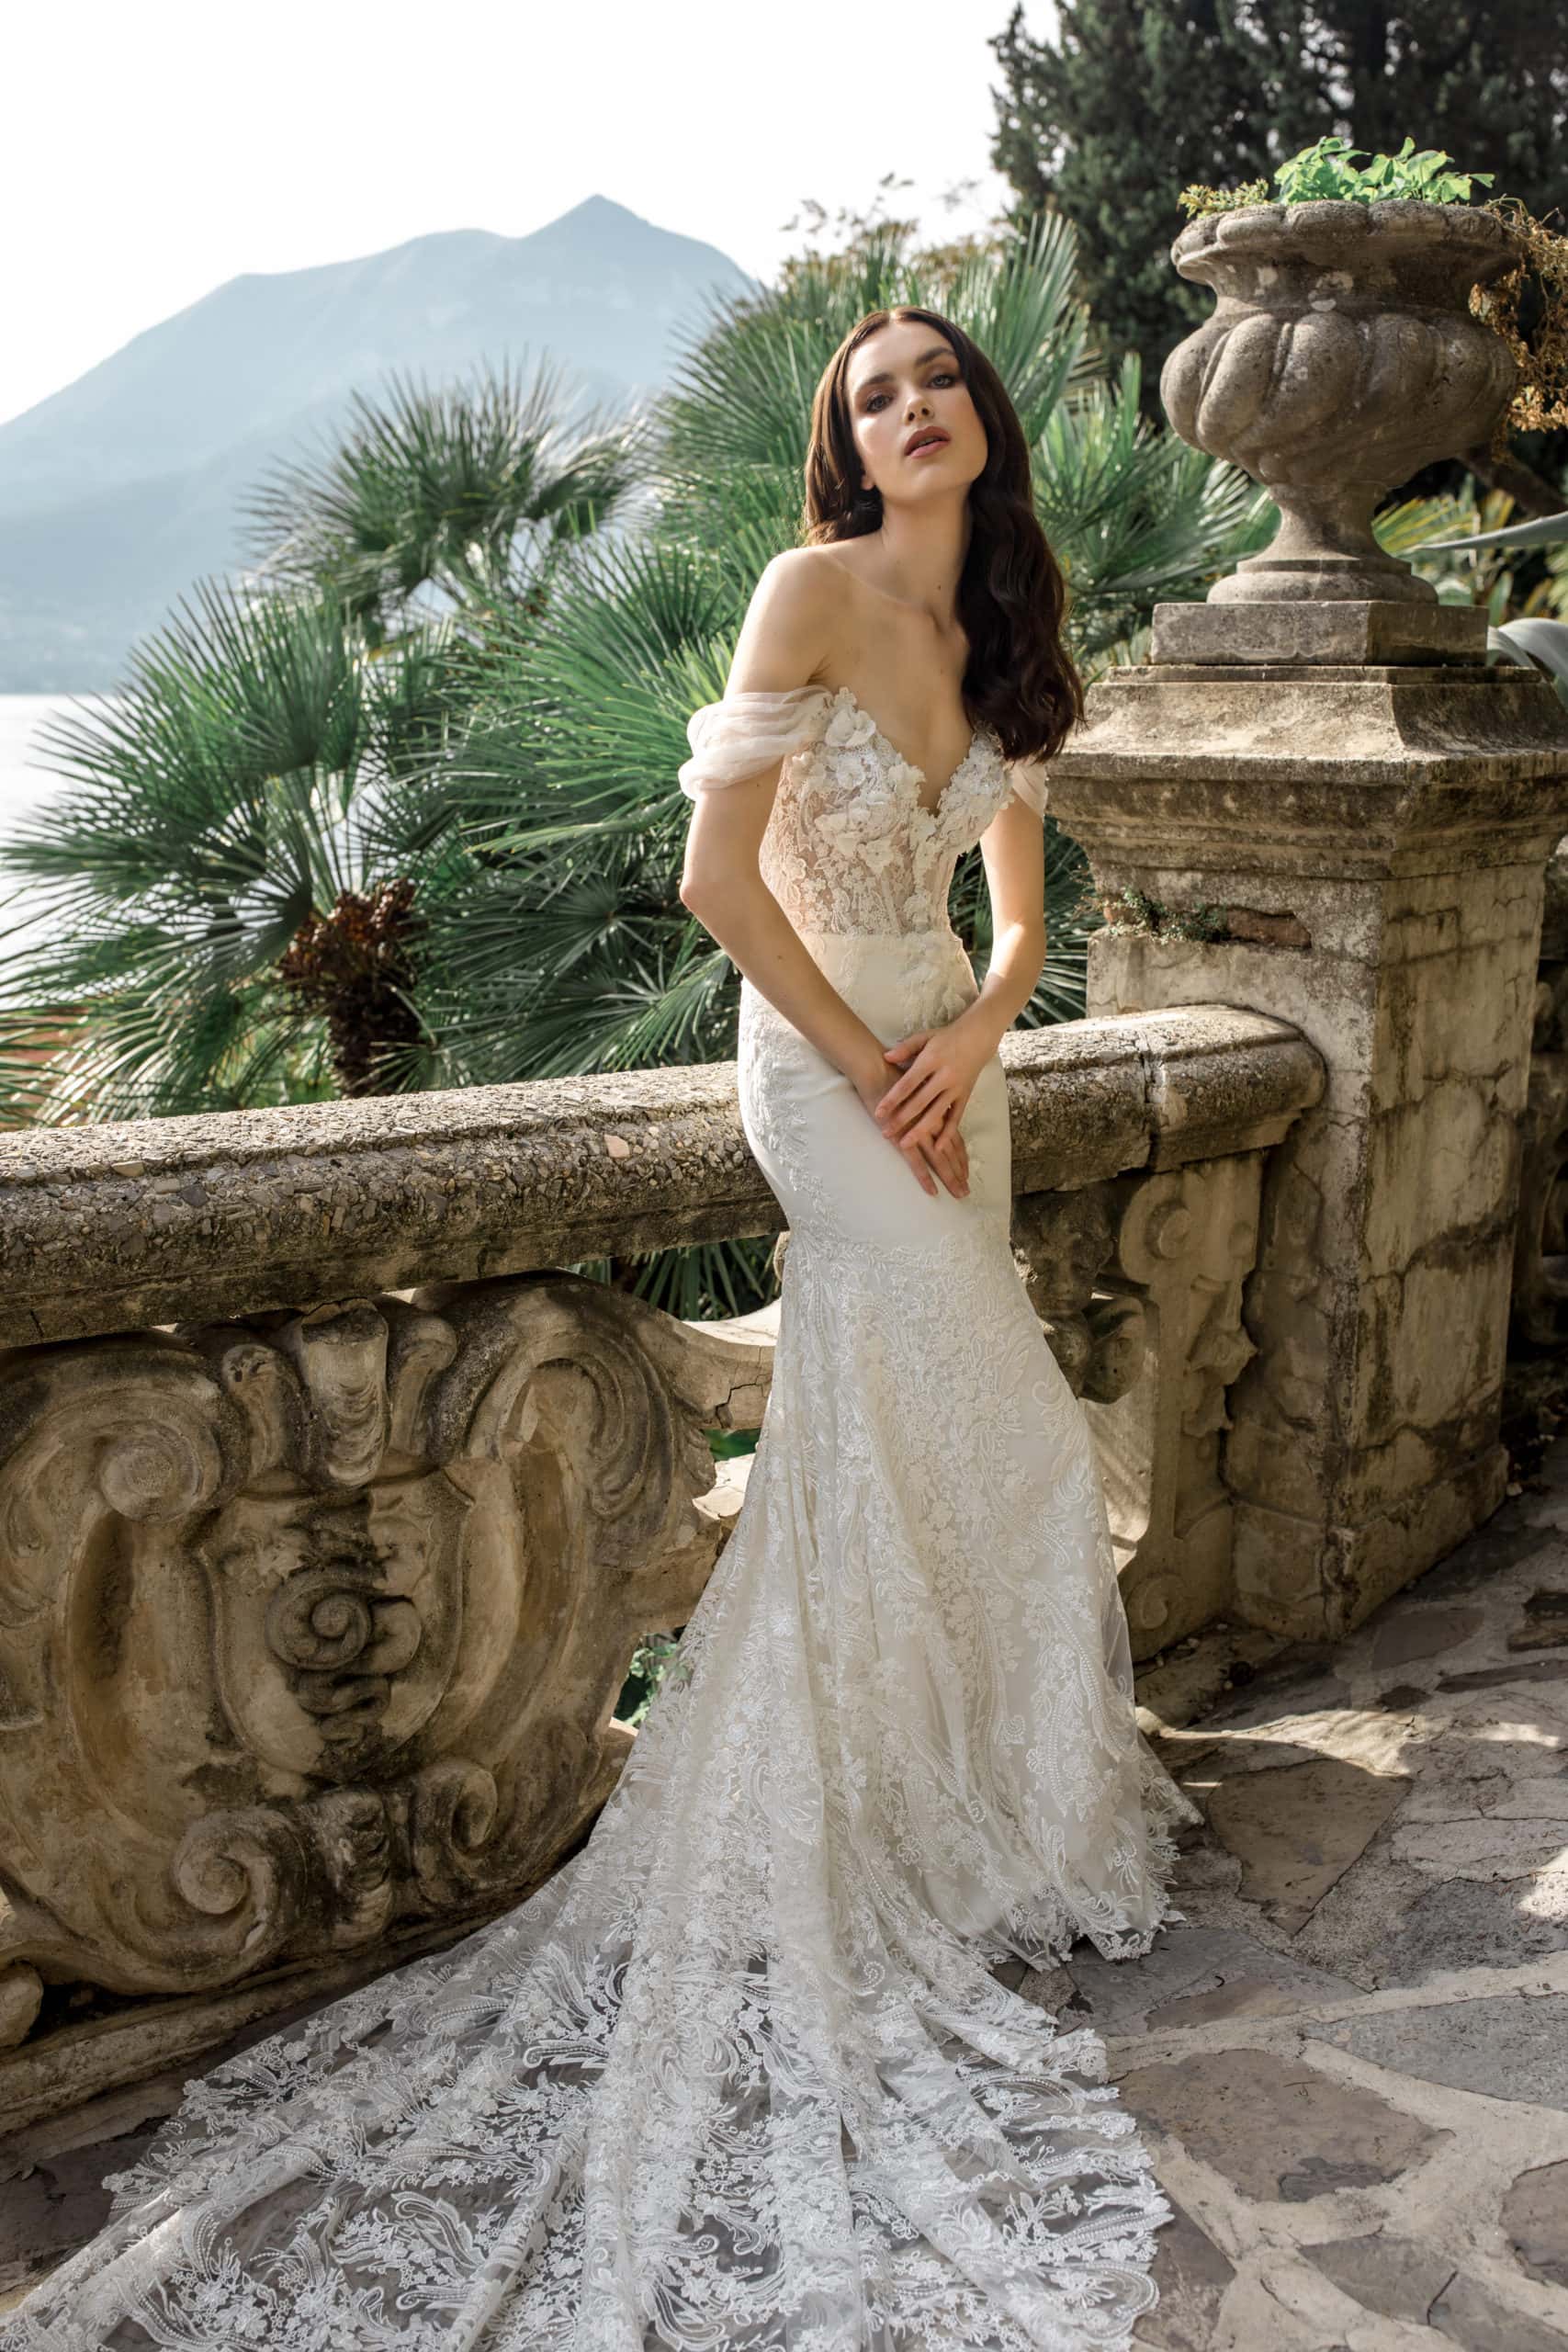 Model leans against banister in lace bridal gown on Lake Como